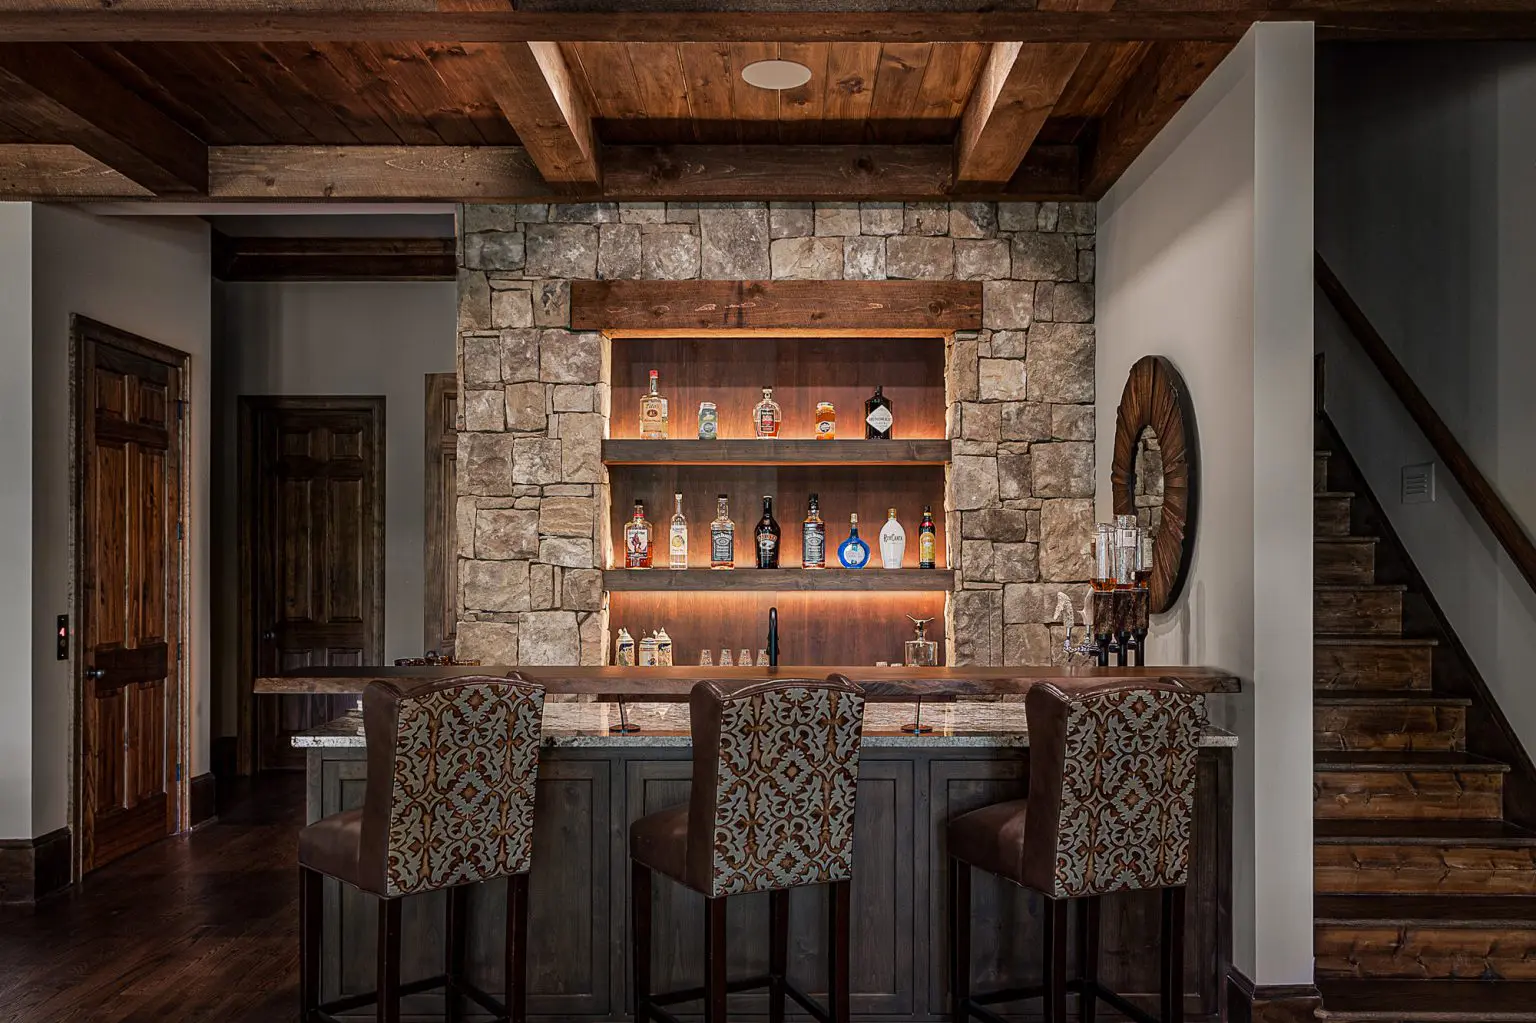 Home bar with stone accent wall, wooden shelves for liquor display, and patterned bar stools.